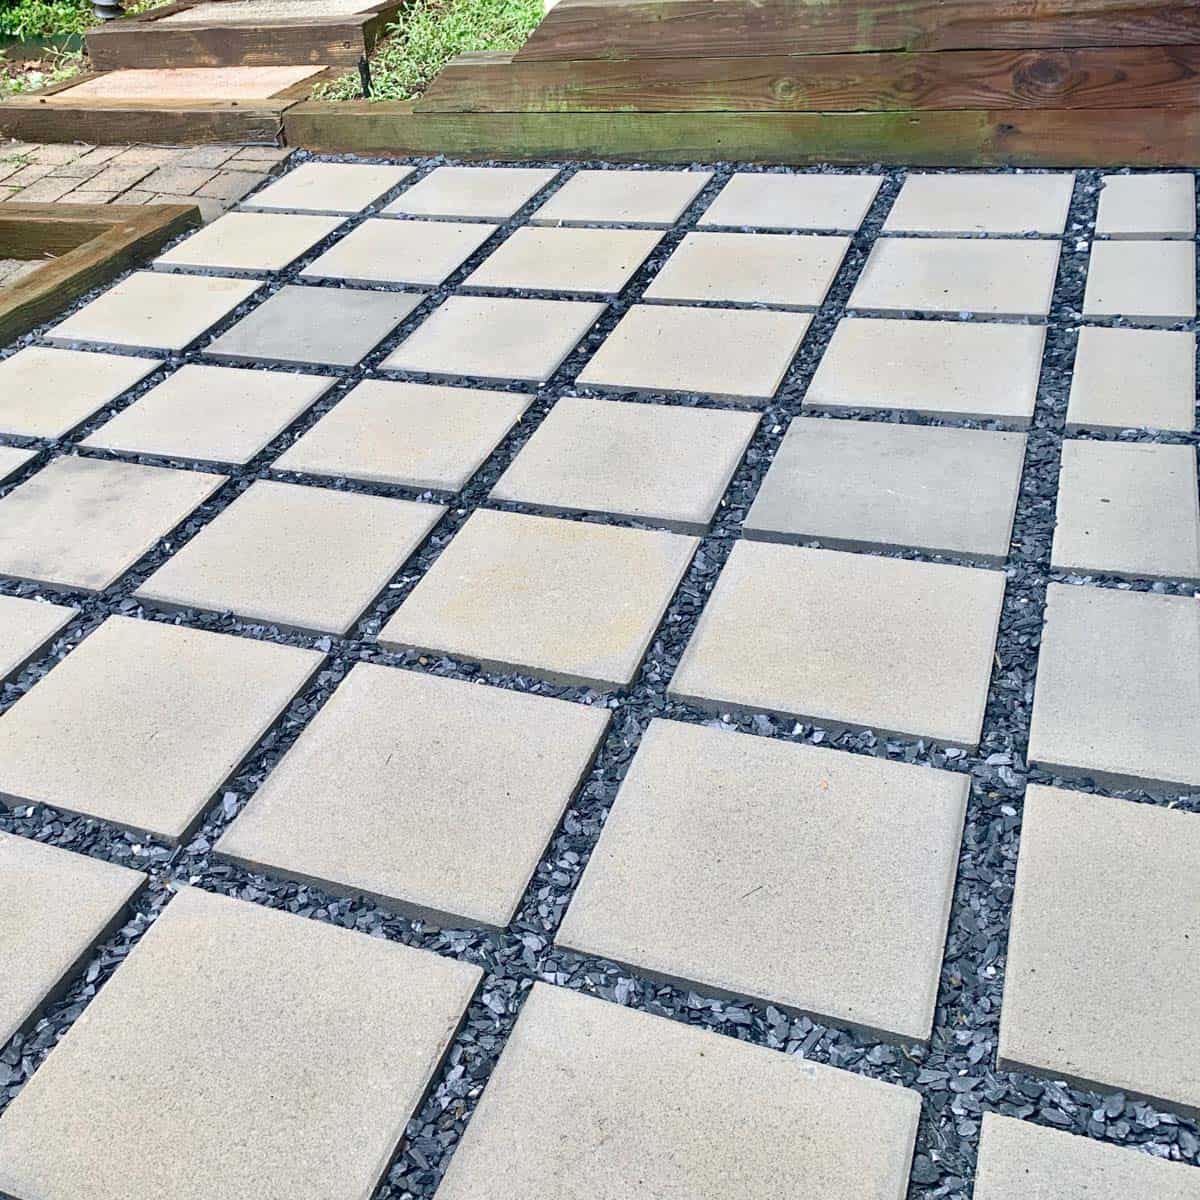 How To Build A Concrete Paver Patio: In Your Backyard